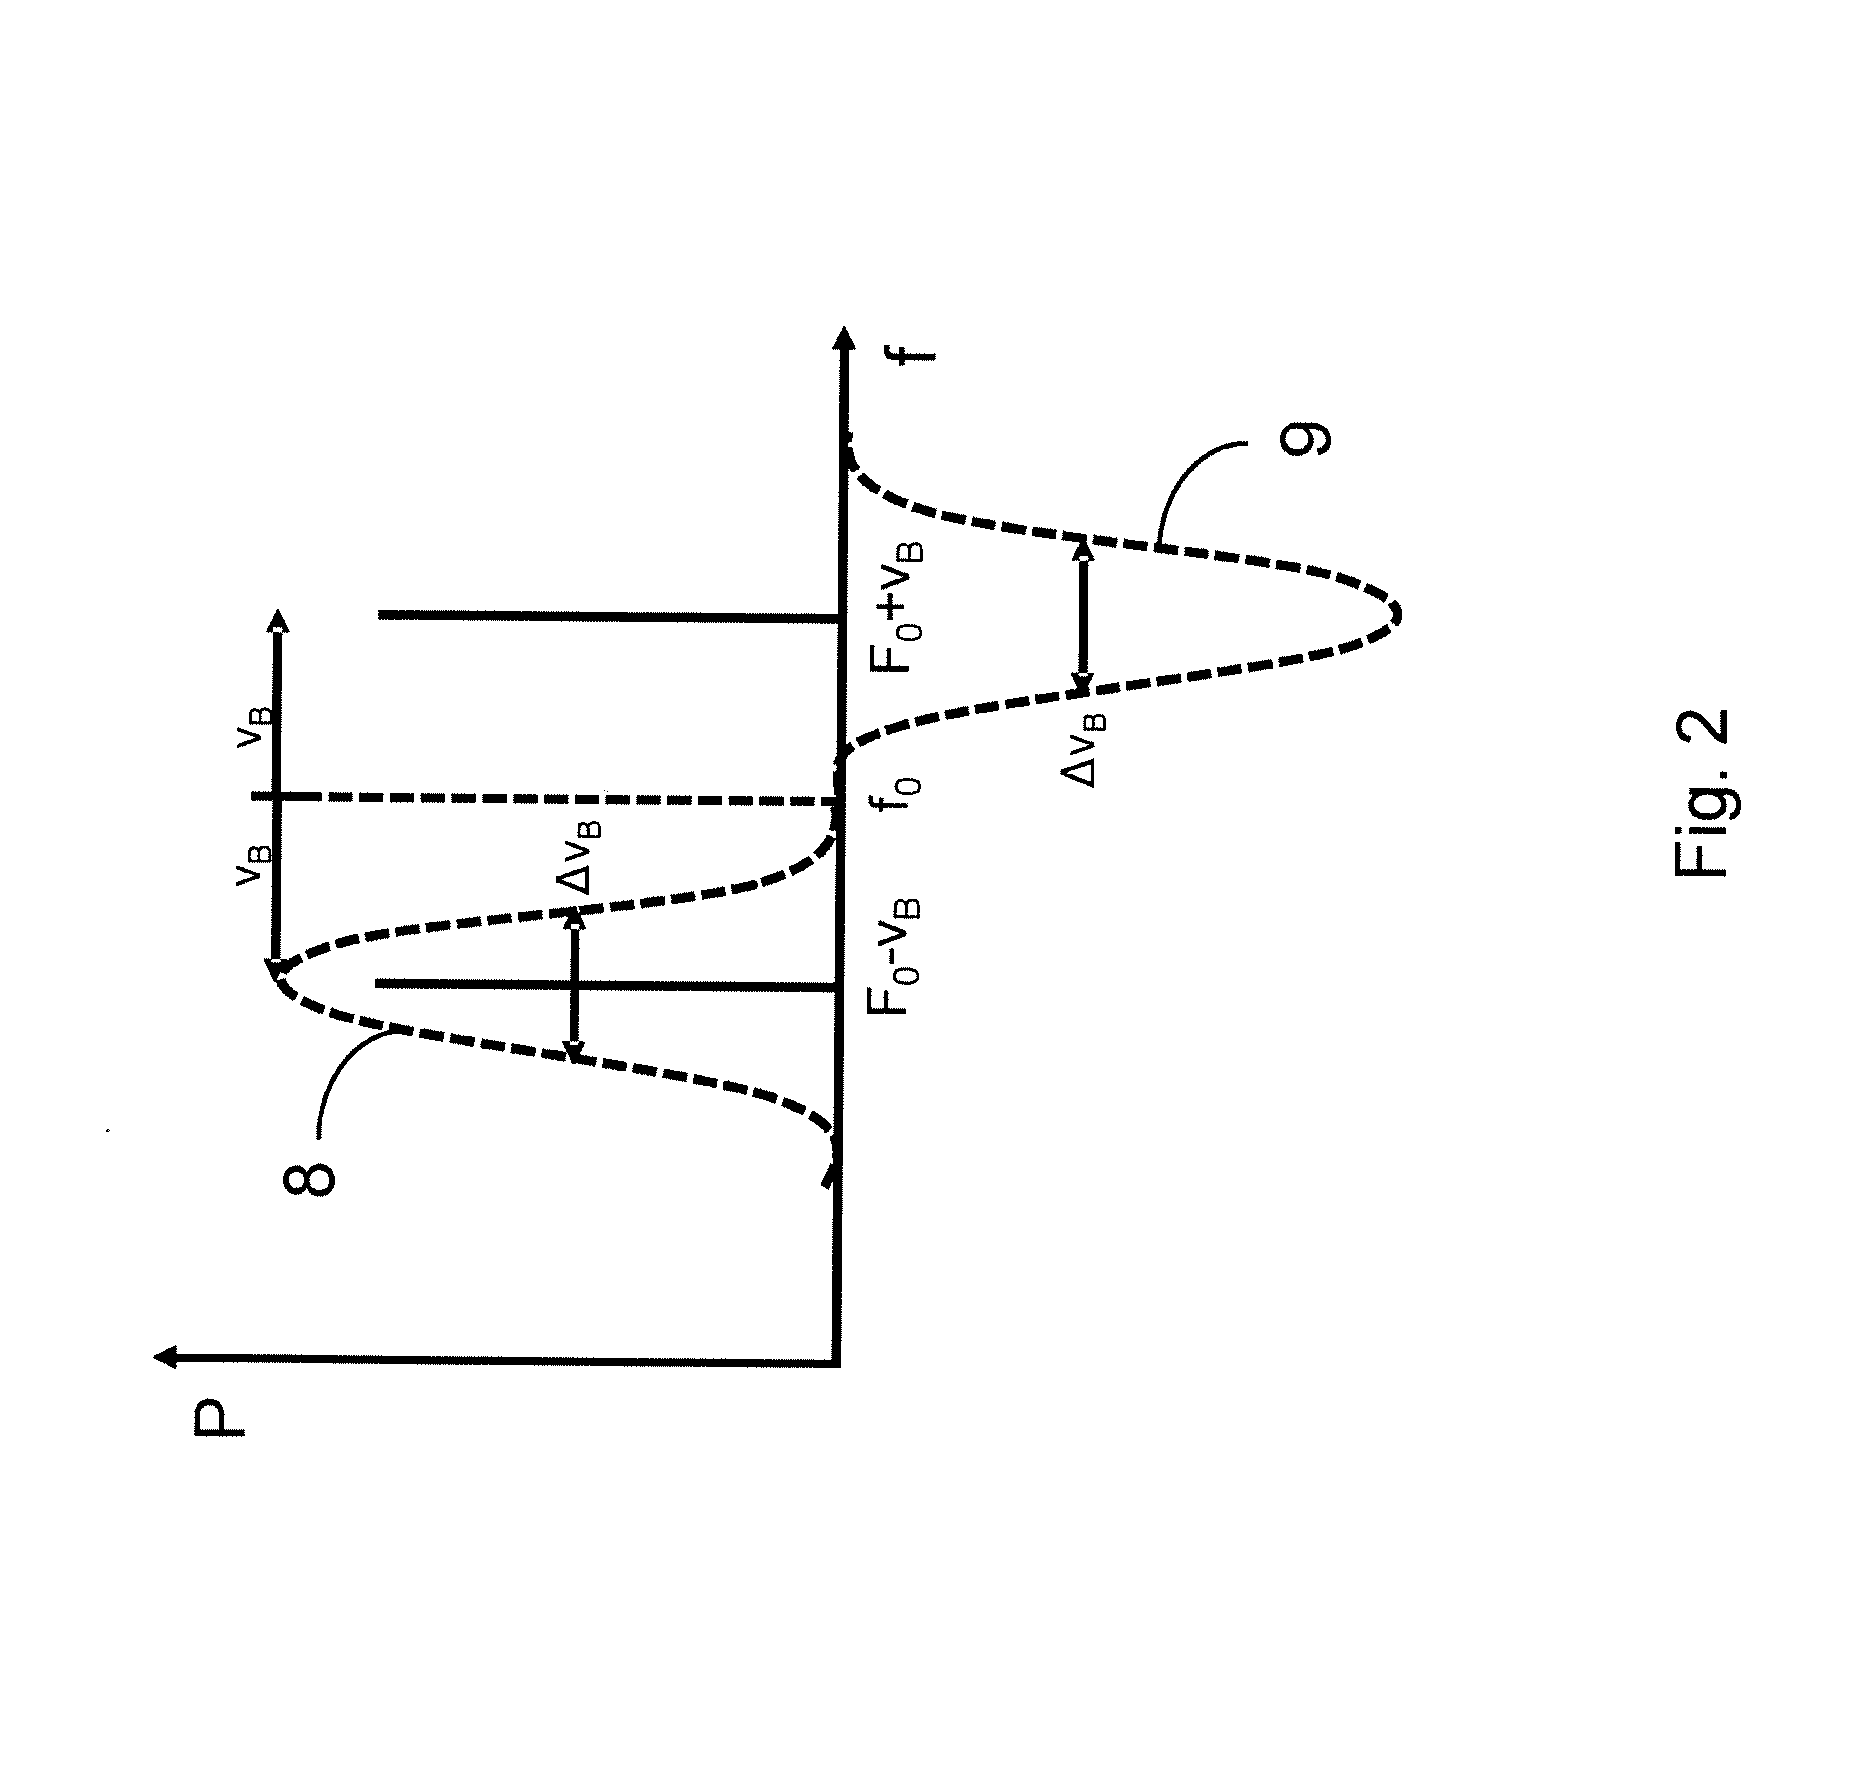 Distributed fiber optic sensing system and method based on stimulated brillouin scattering